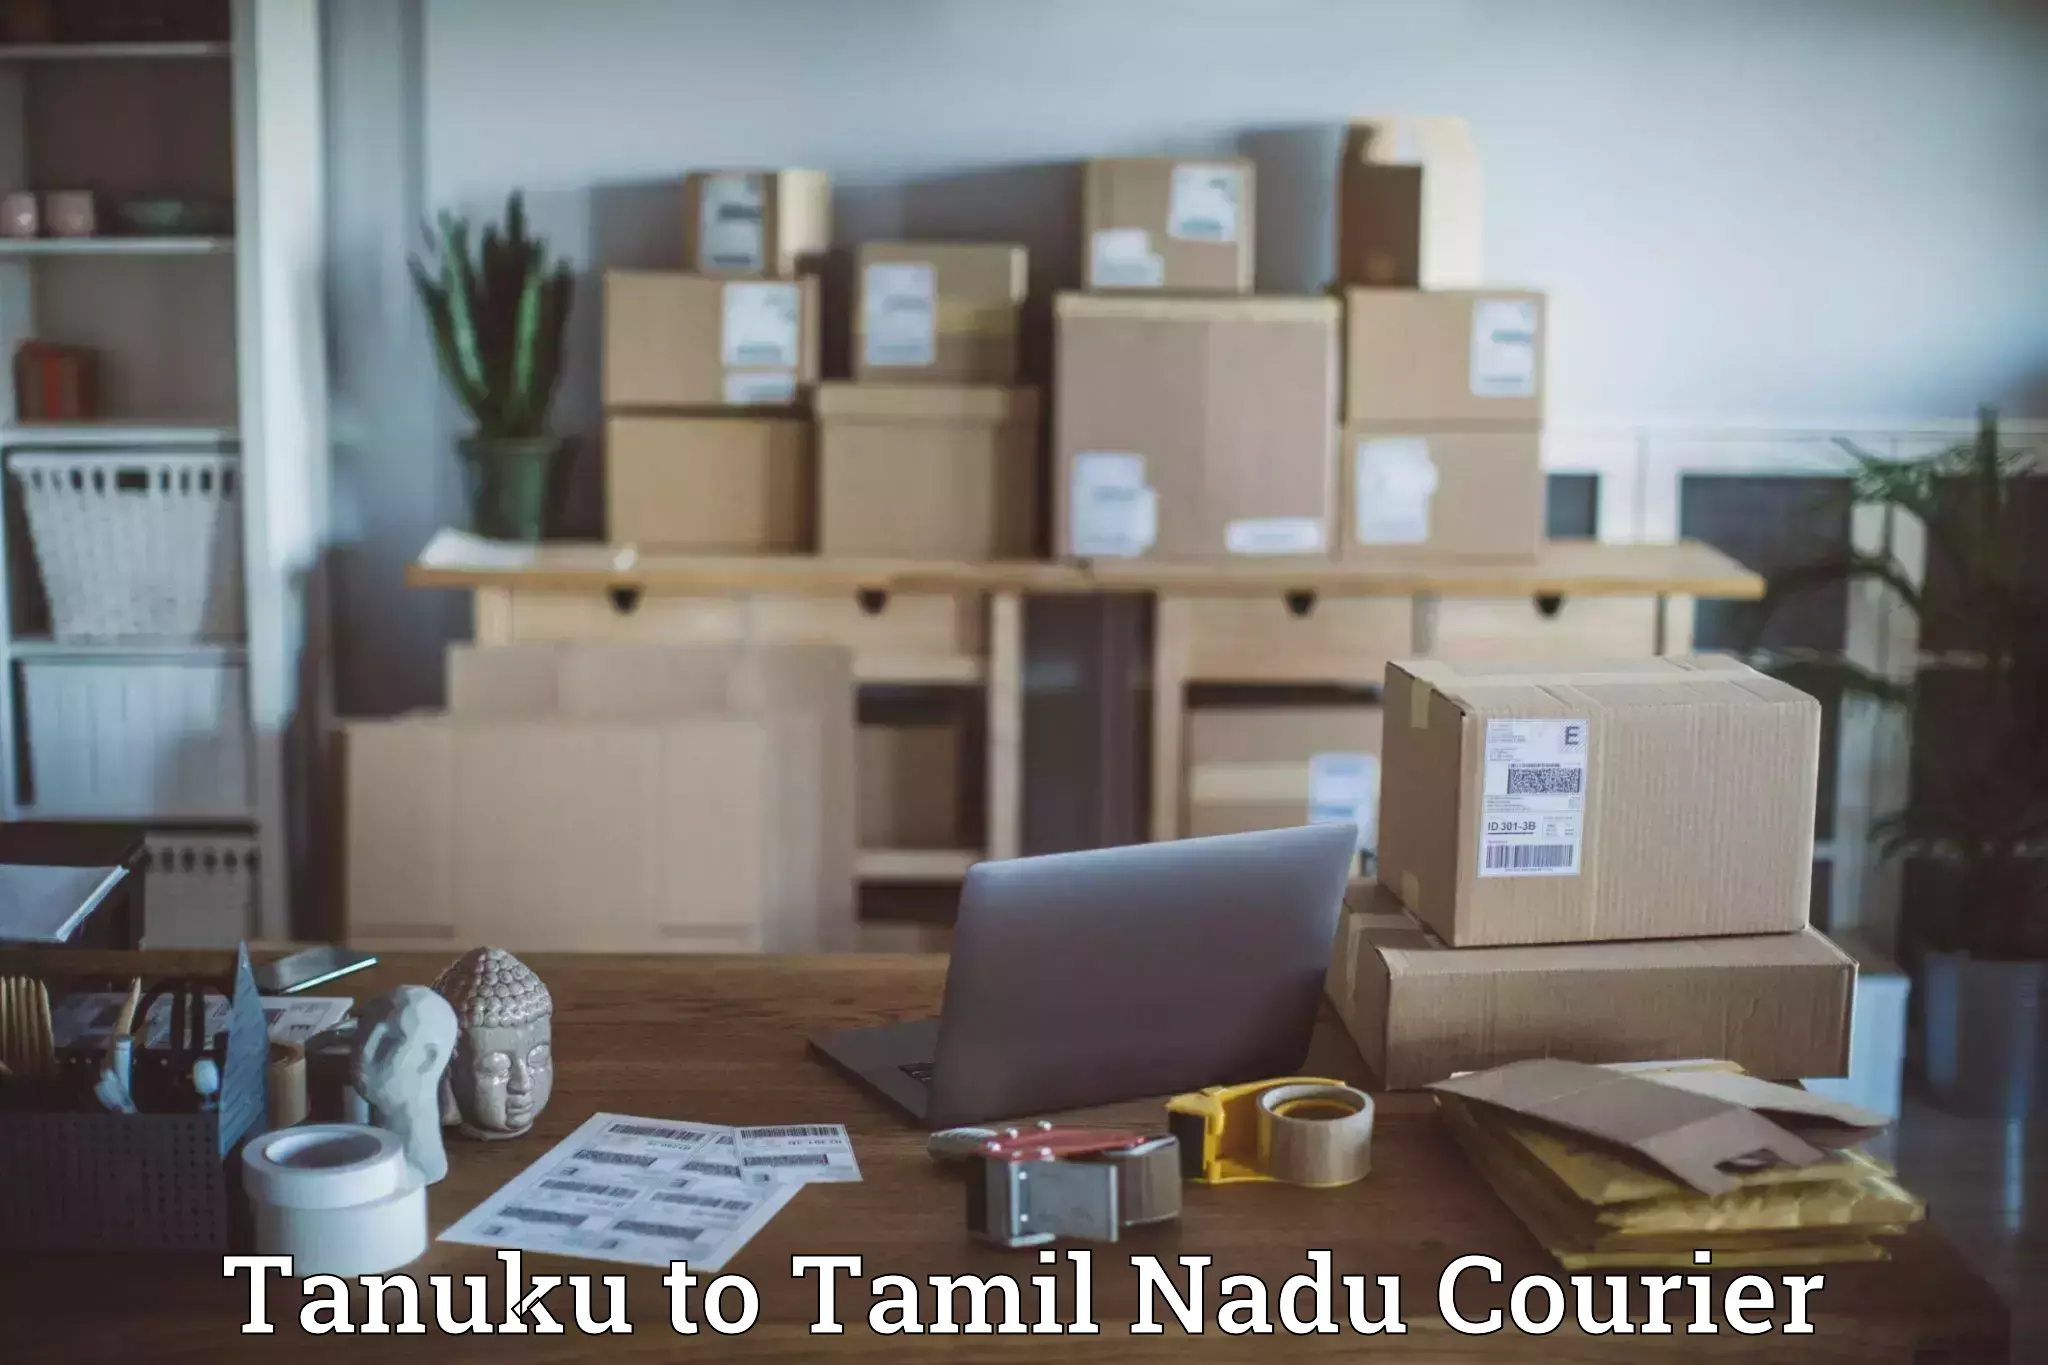 Full-service courier options Tanuku to Tamil Nadu